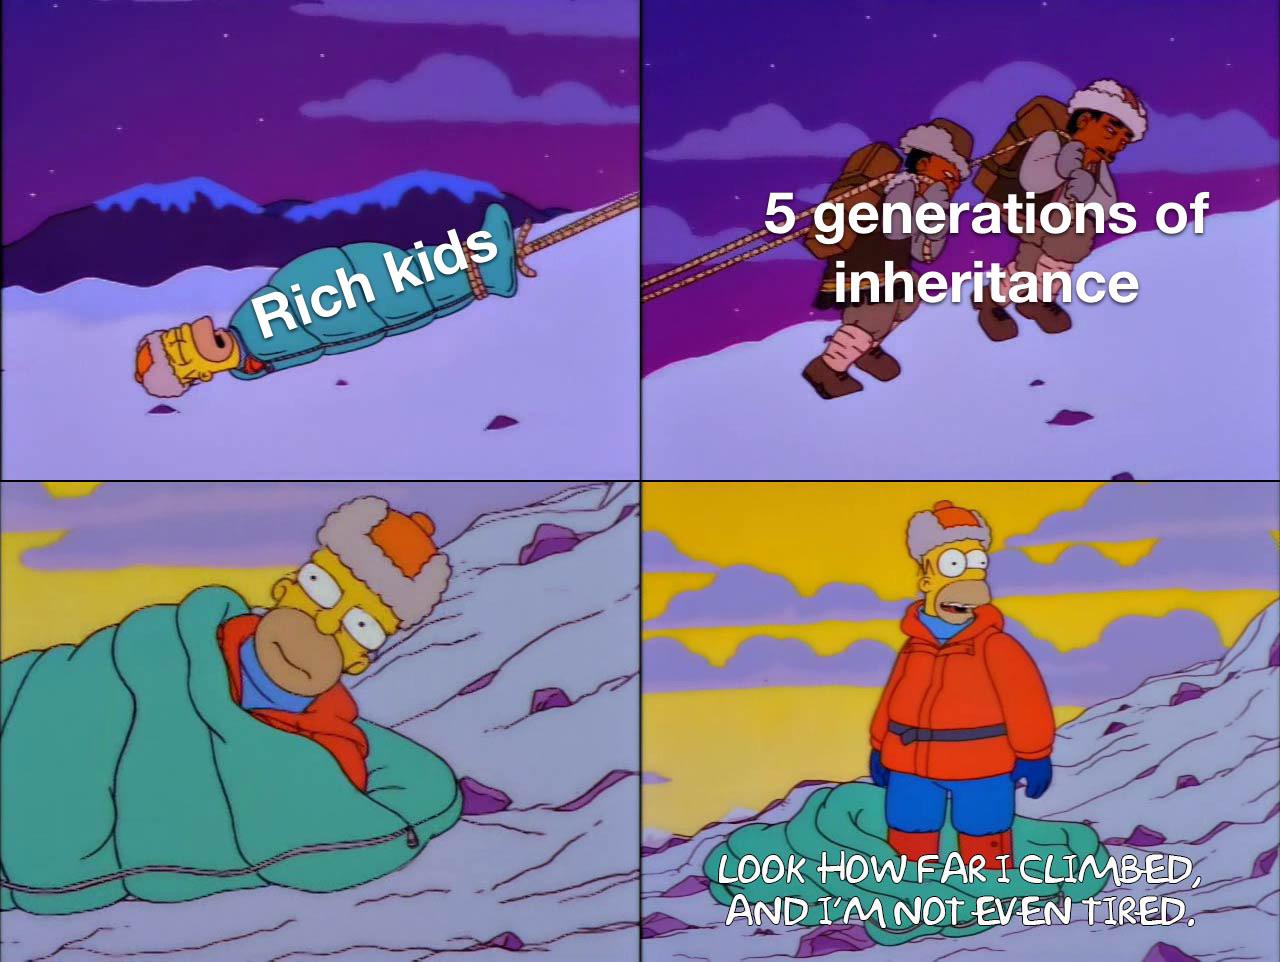 funny memes - dank memes - look how far i climbed and im not even tired - 5 generations of inheritance Il Rich kids Look How Far I Climbed, And I'M Not Even Tired.